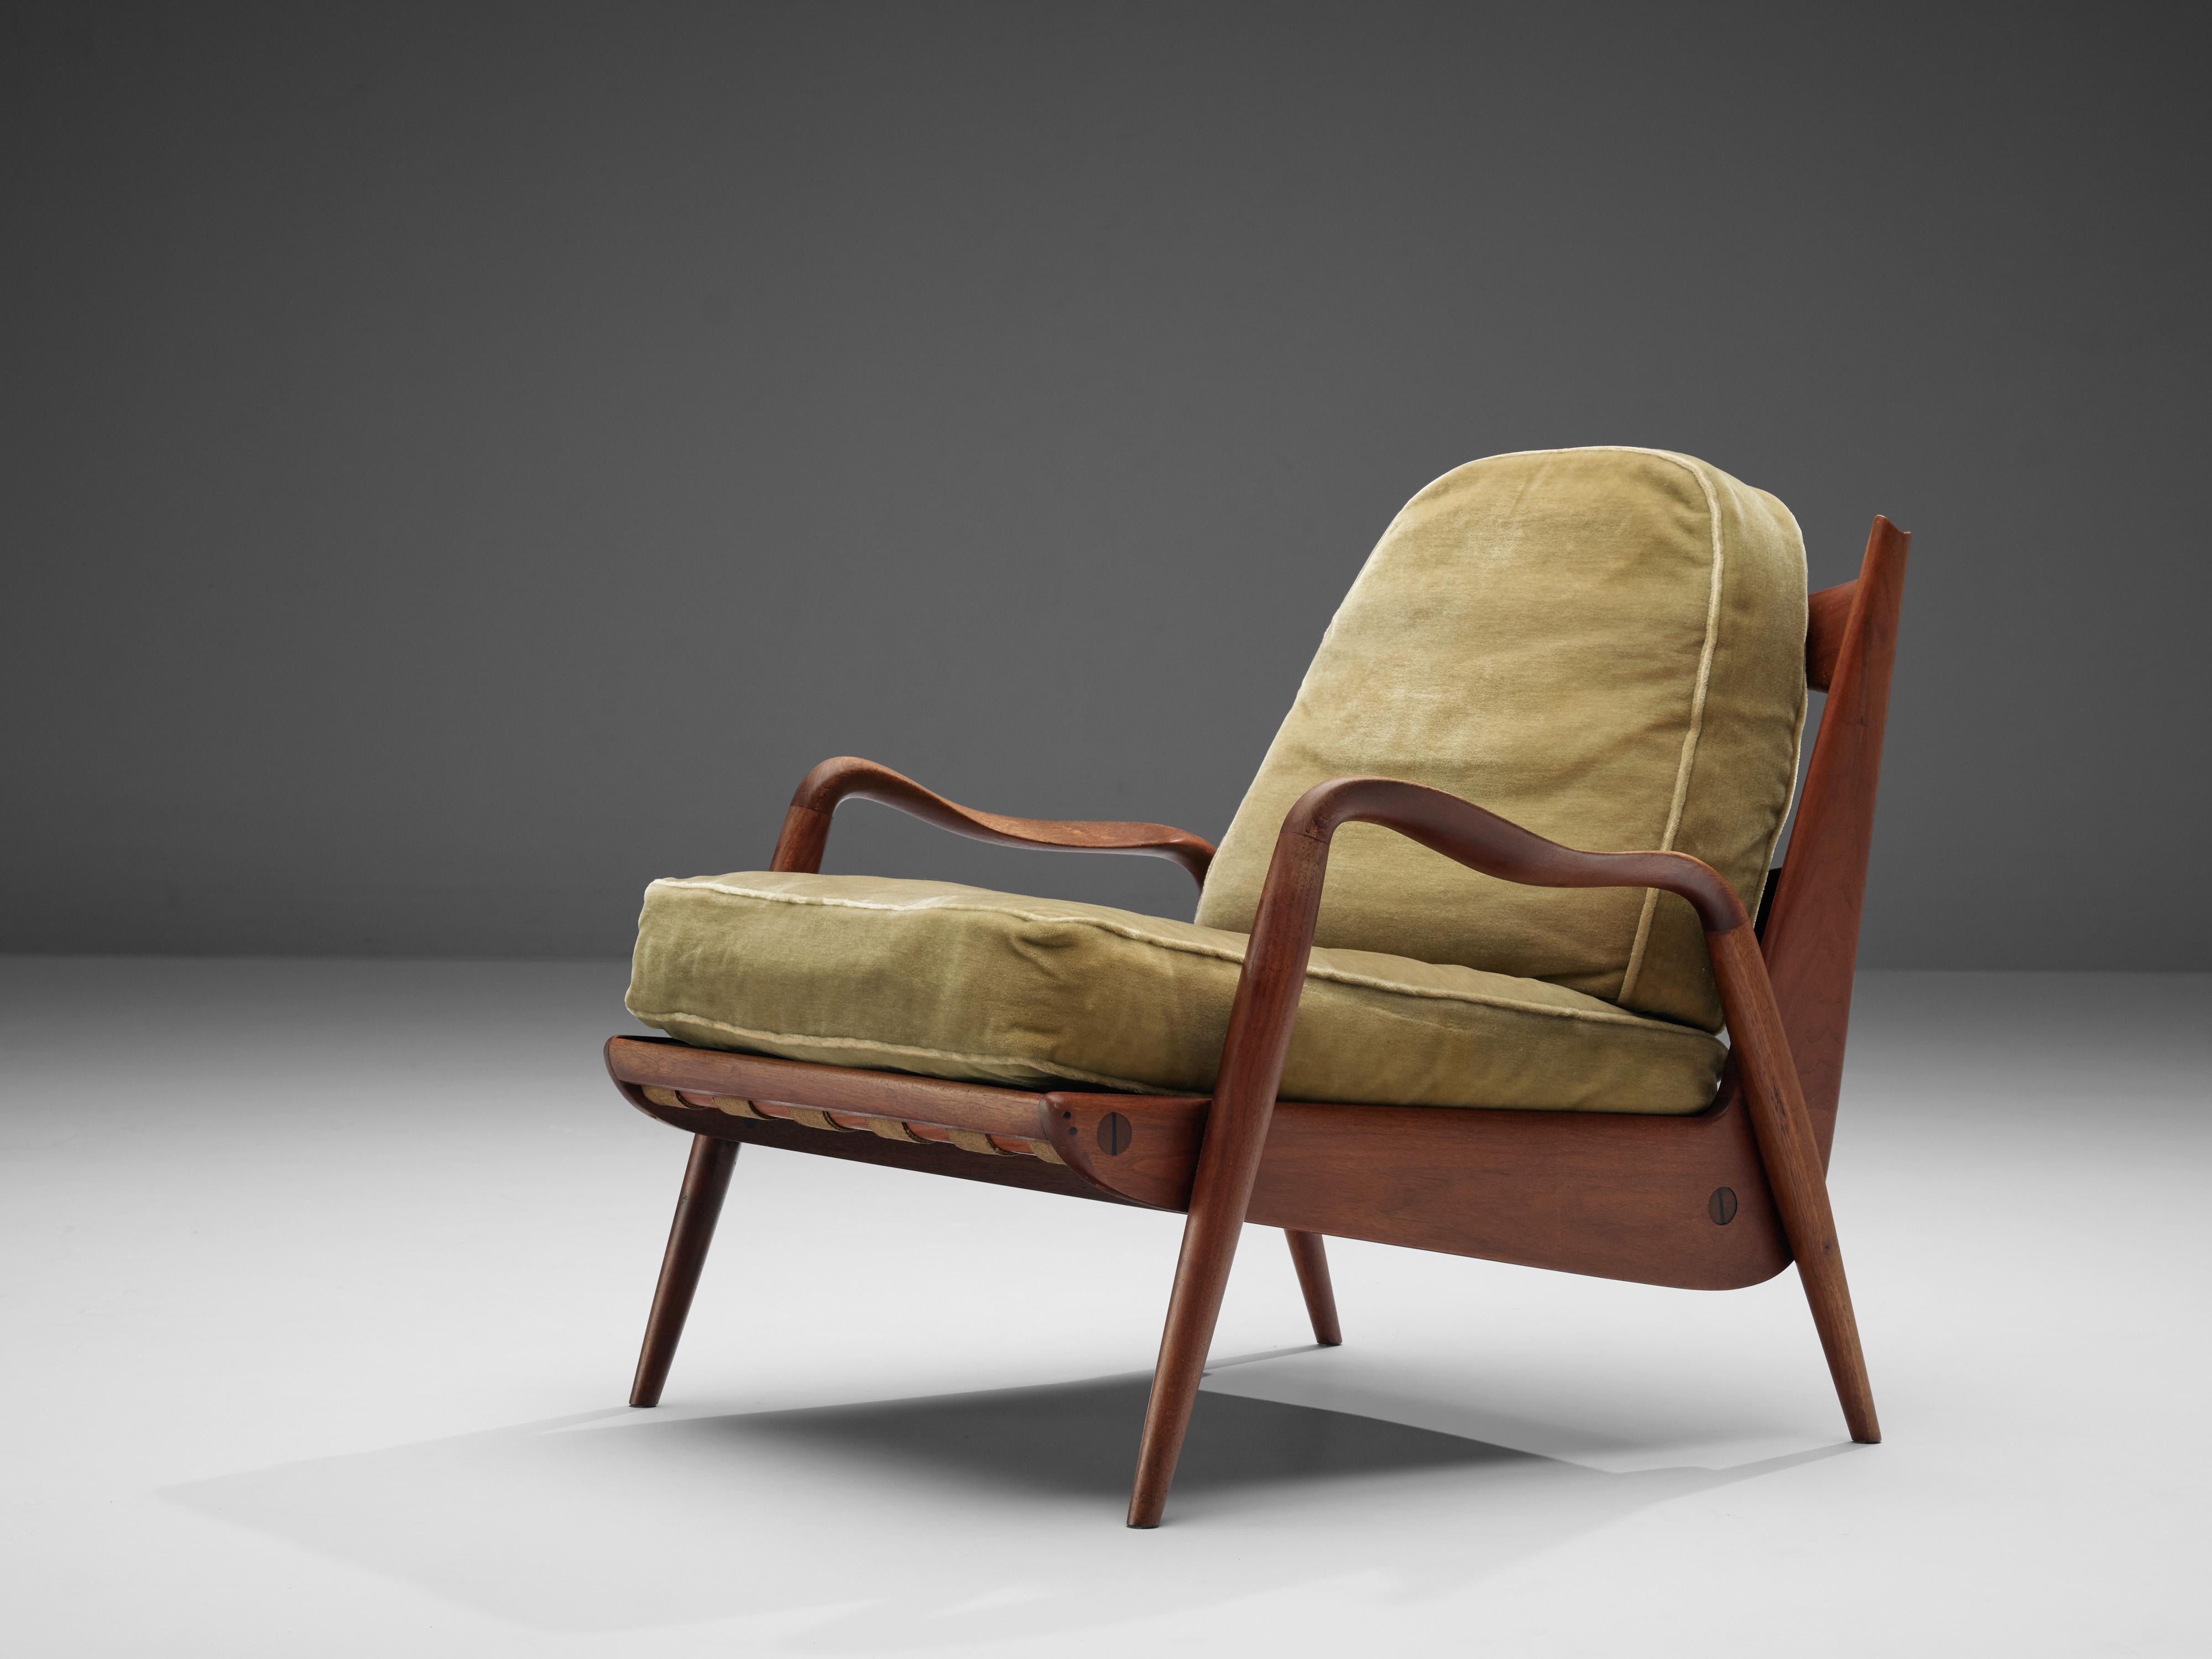 Philip Lloyd Powell, 'New Hope' lounge chair, American walnut, green fabric, United States, 1960s.

This comfortable armchair made out of American walnut and fabric upholstery is designed by Philip Lloyd Powell. The name 'New Hope' refers to the